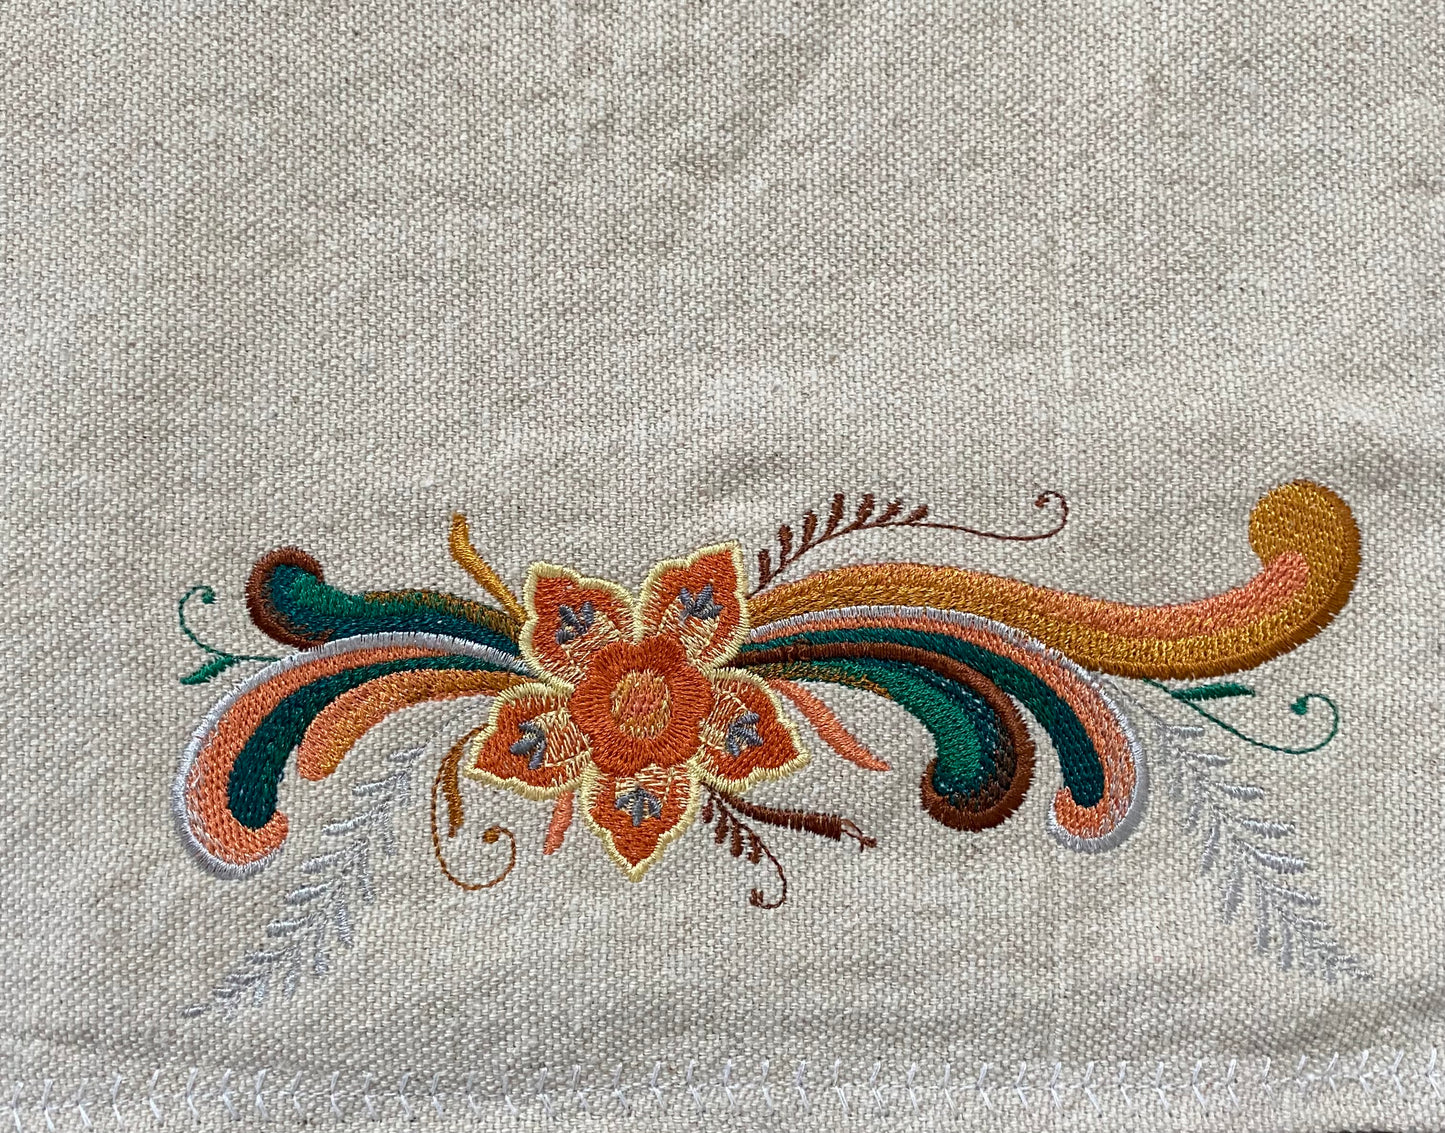 Earthy Toned Rosemaling Canvas Table Runner